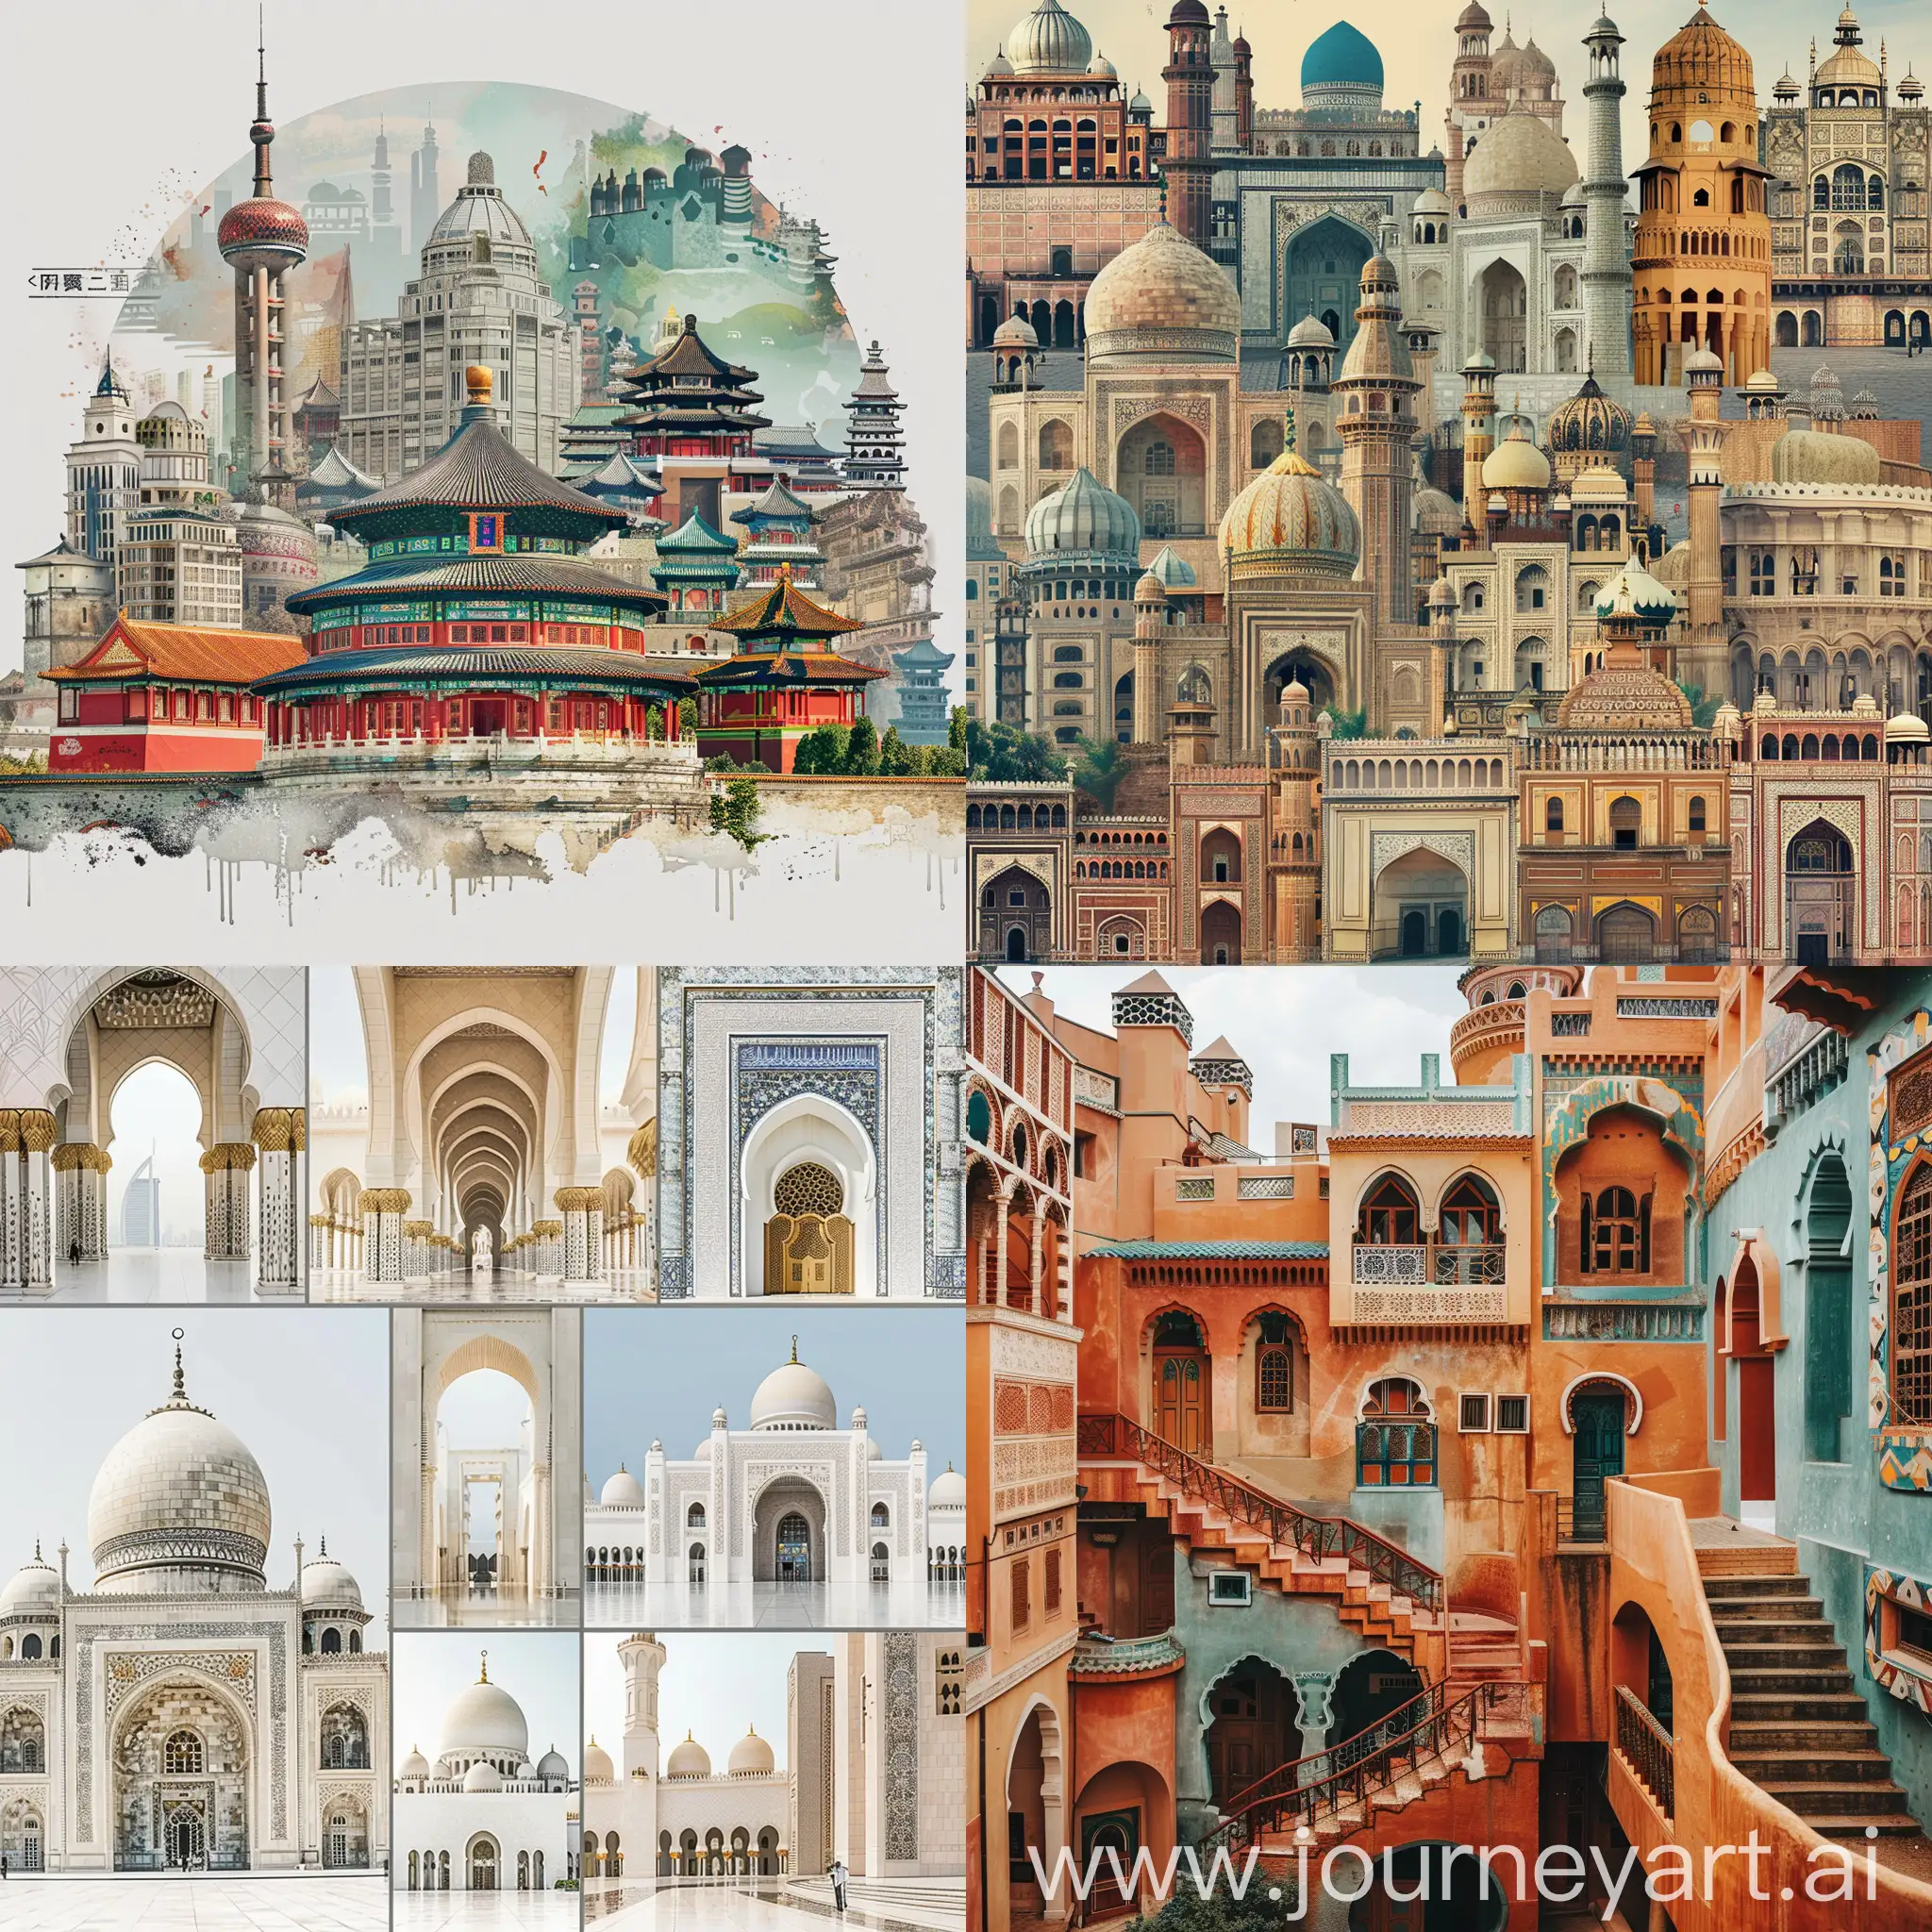 Engaging image showcasing diverse architectural styles from around the world.